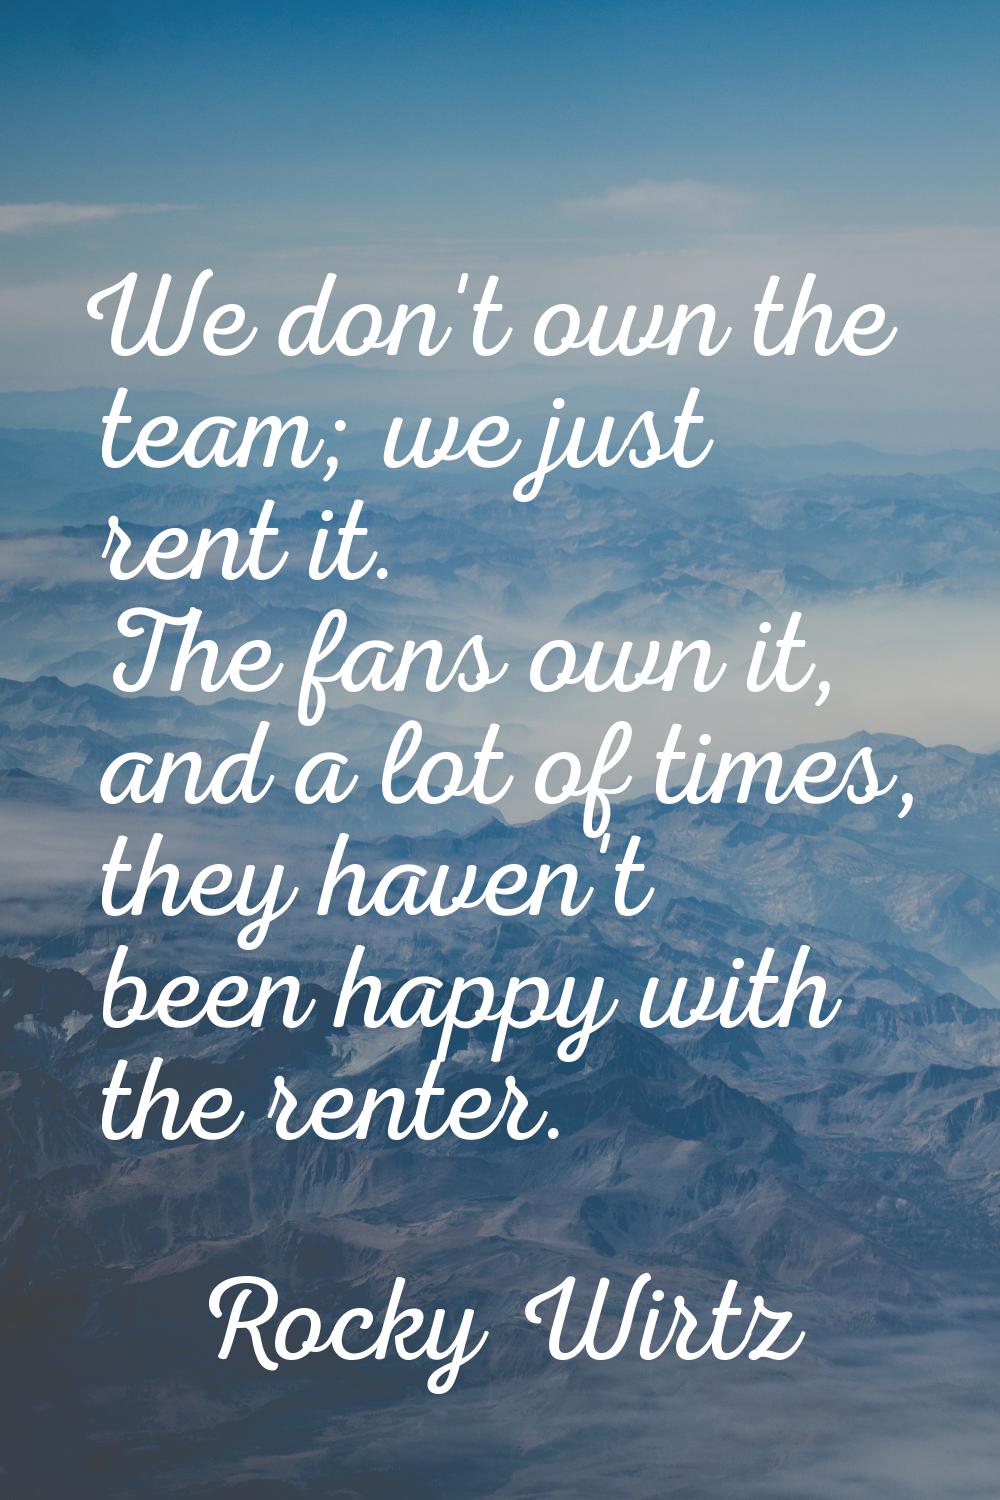 We don't own the team; we just rent it. The fans own it, and a lot of times, they haven't been happ